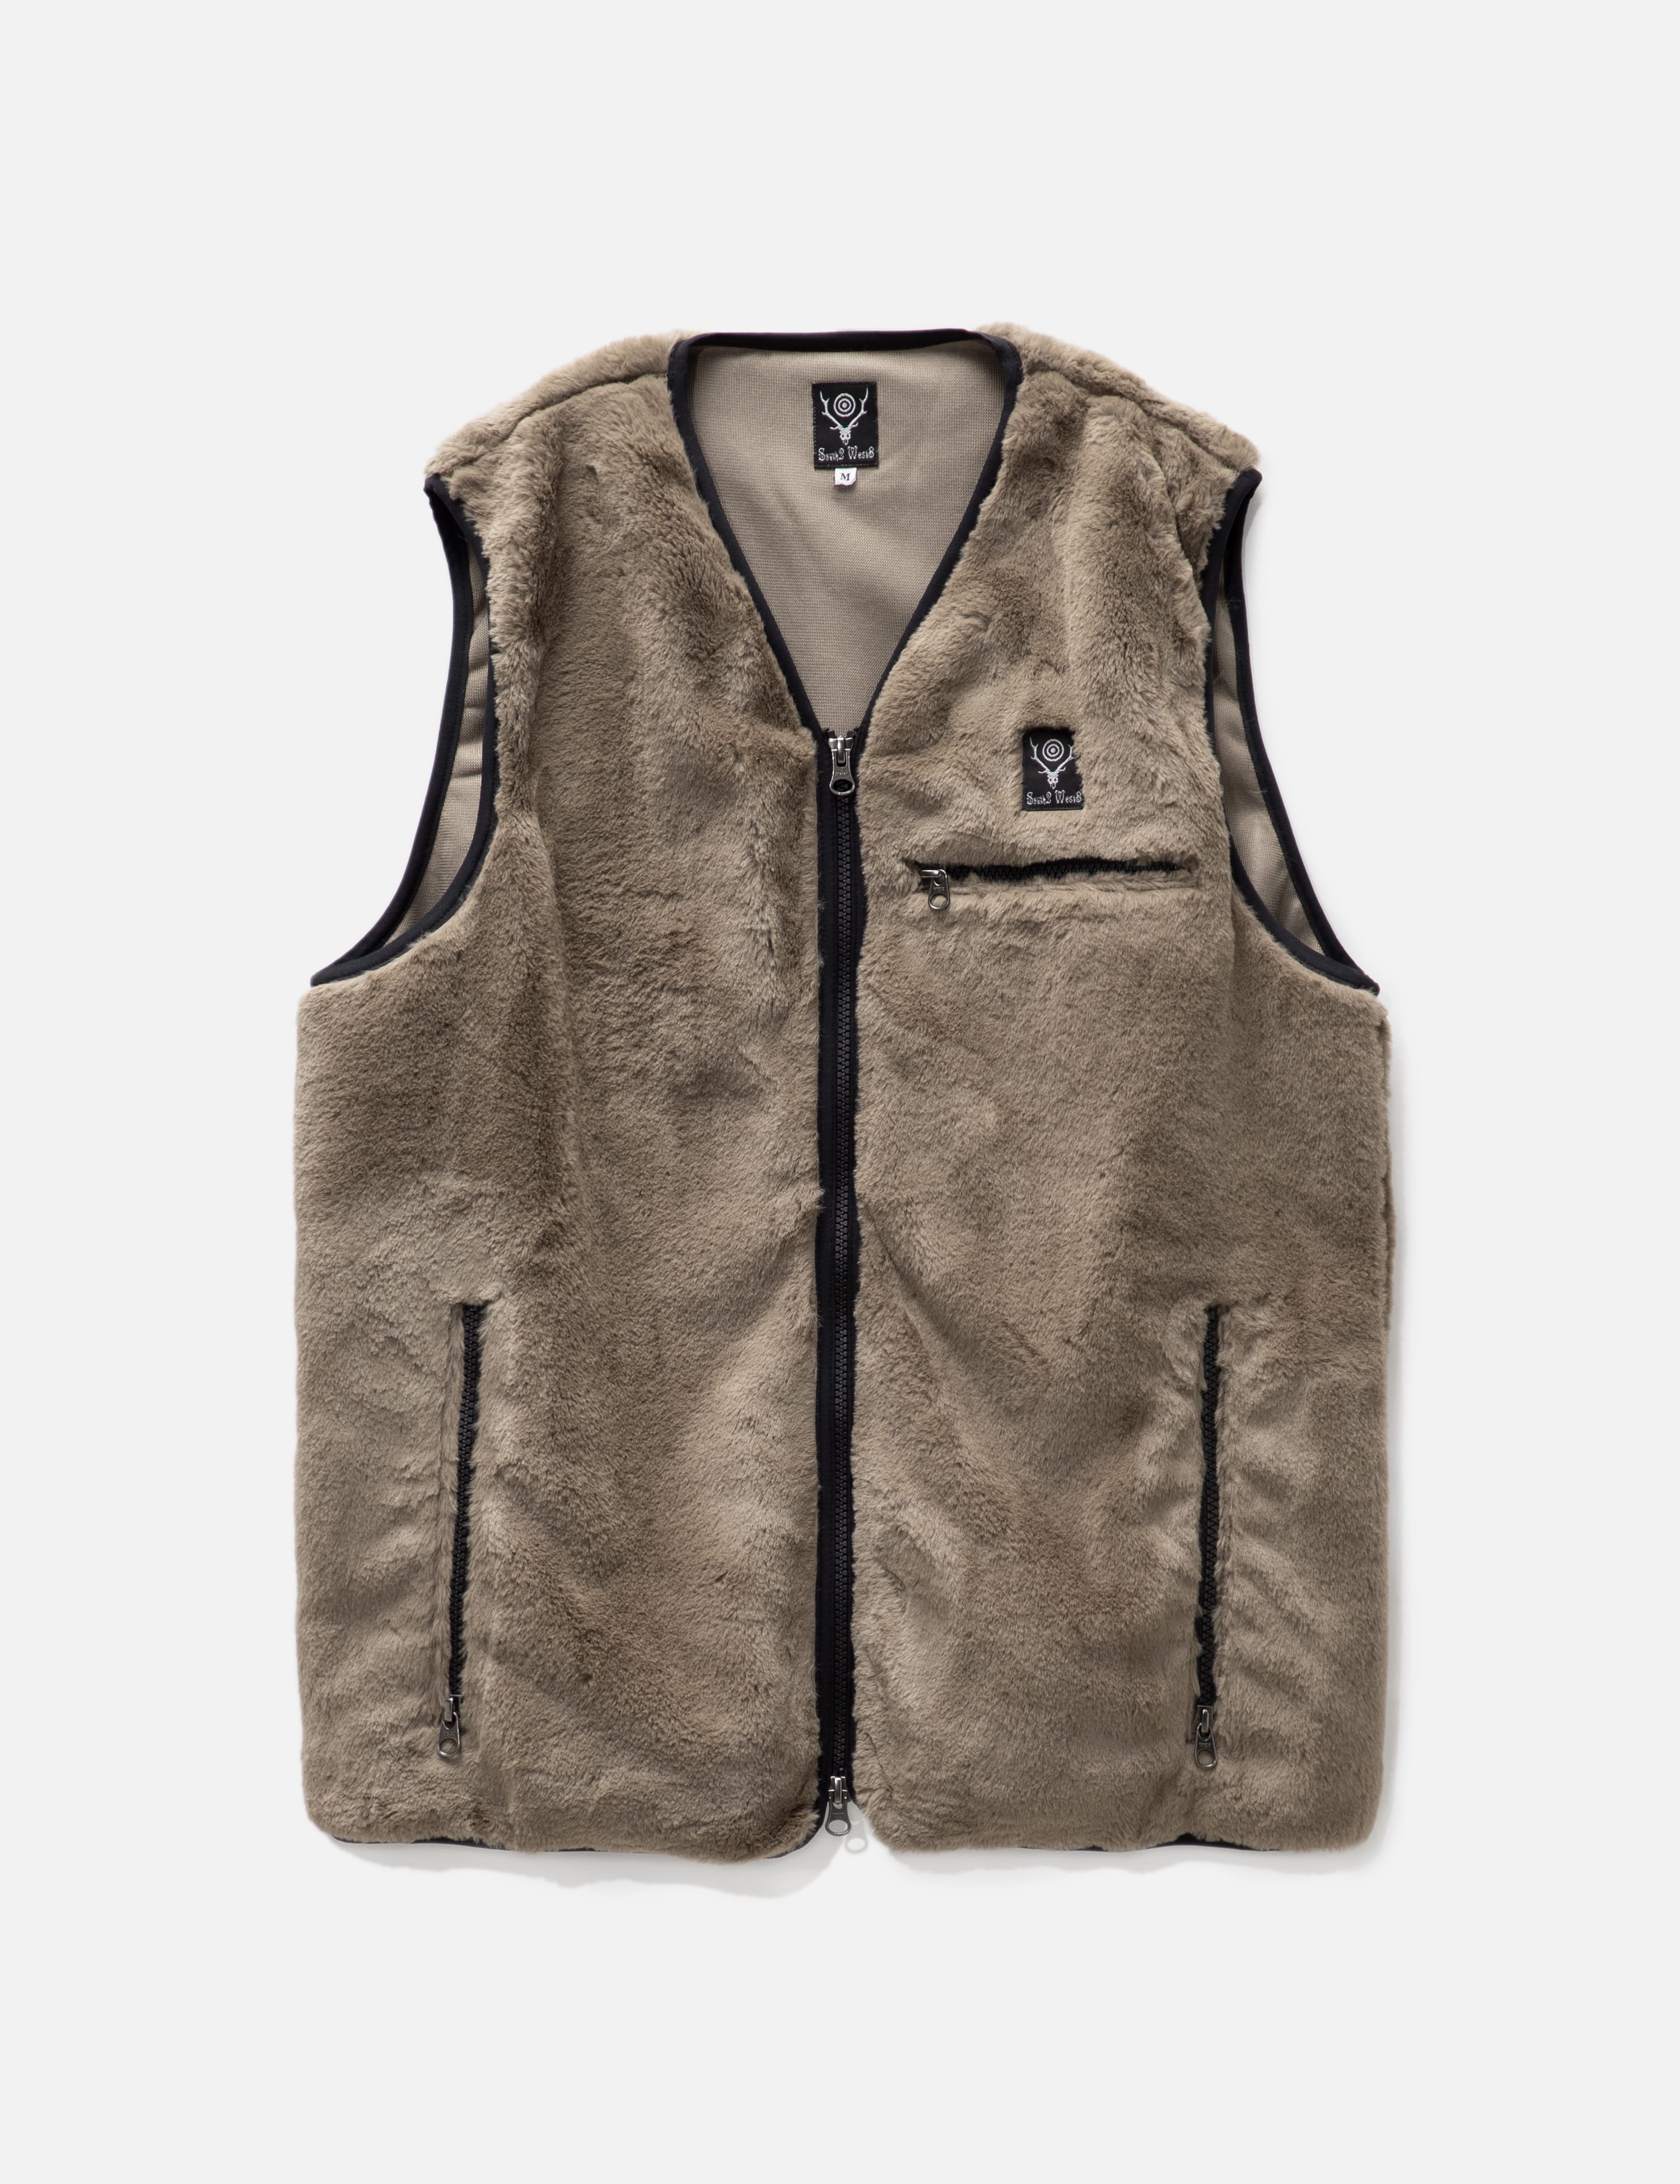 South2 West8 - Micro Fur Piping Vest | HBX - Globally Curated 